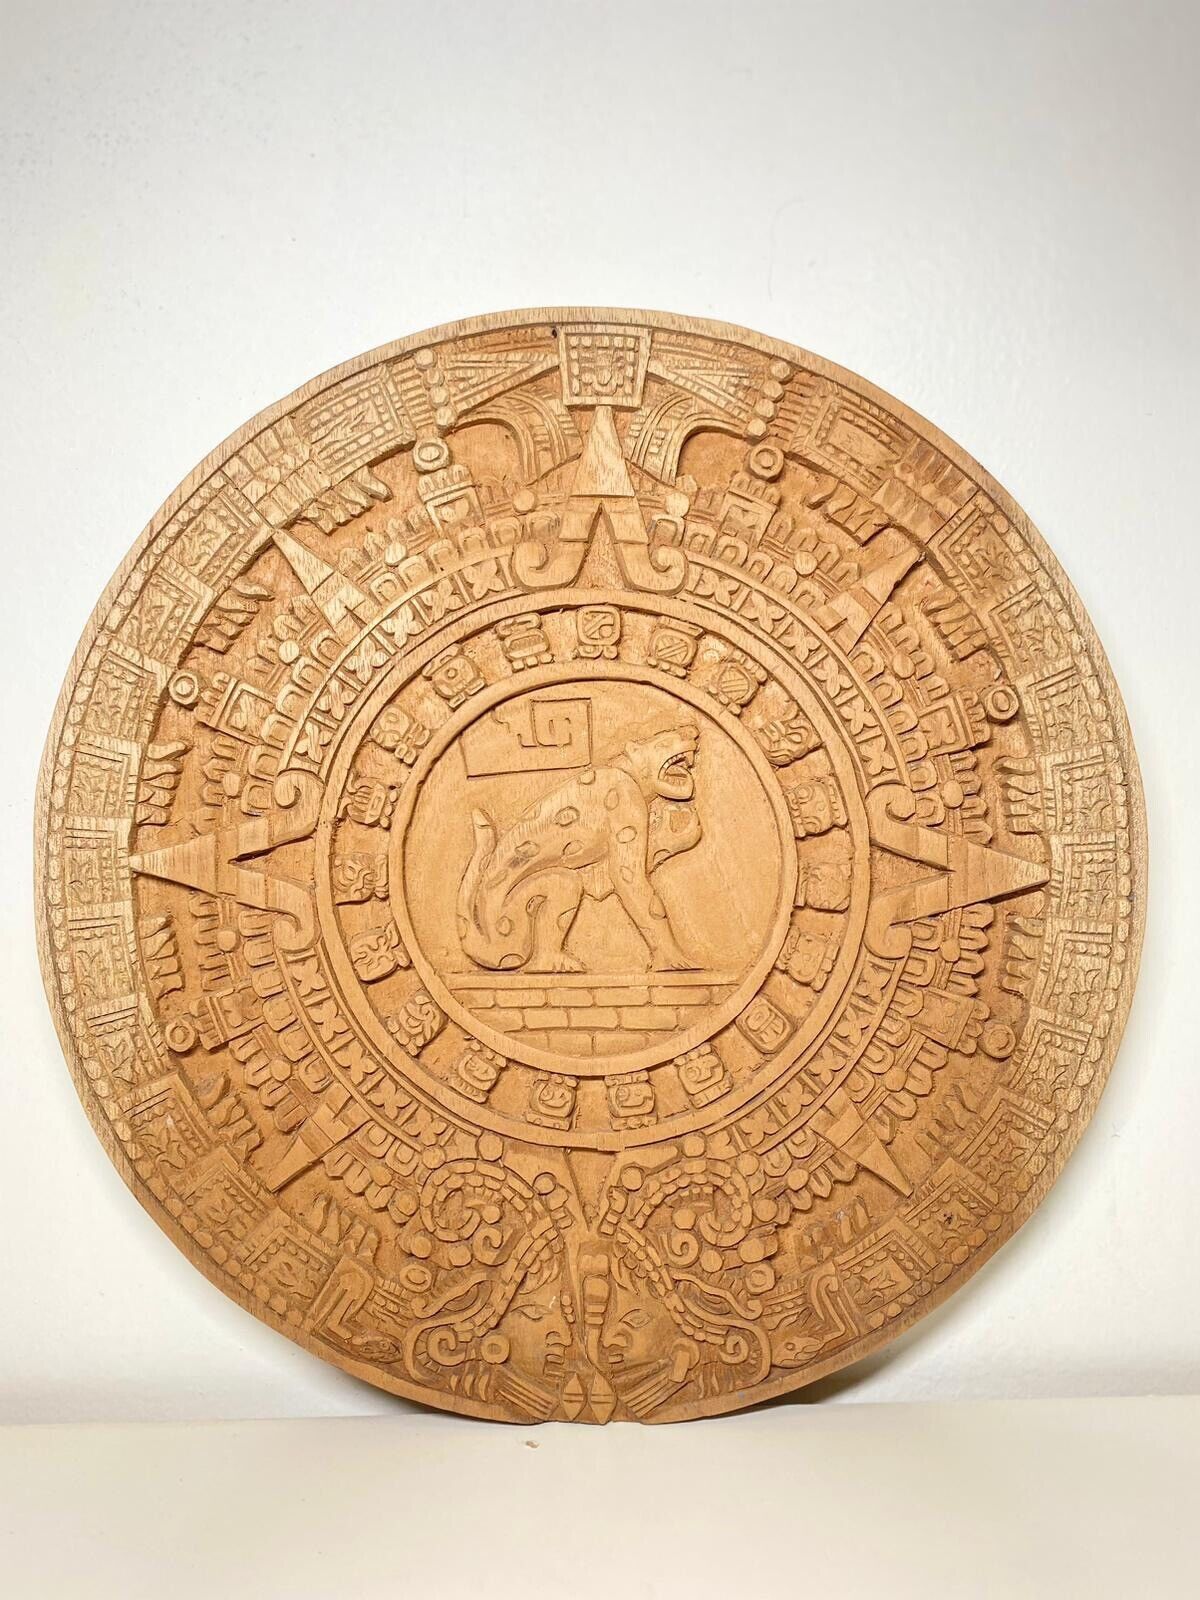 Aztec Calendar Hand Carved Cedar Wood Natural Highly Detailed Excellent Crafted